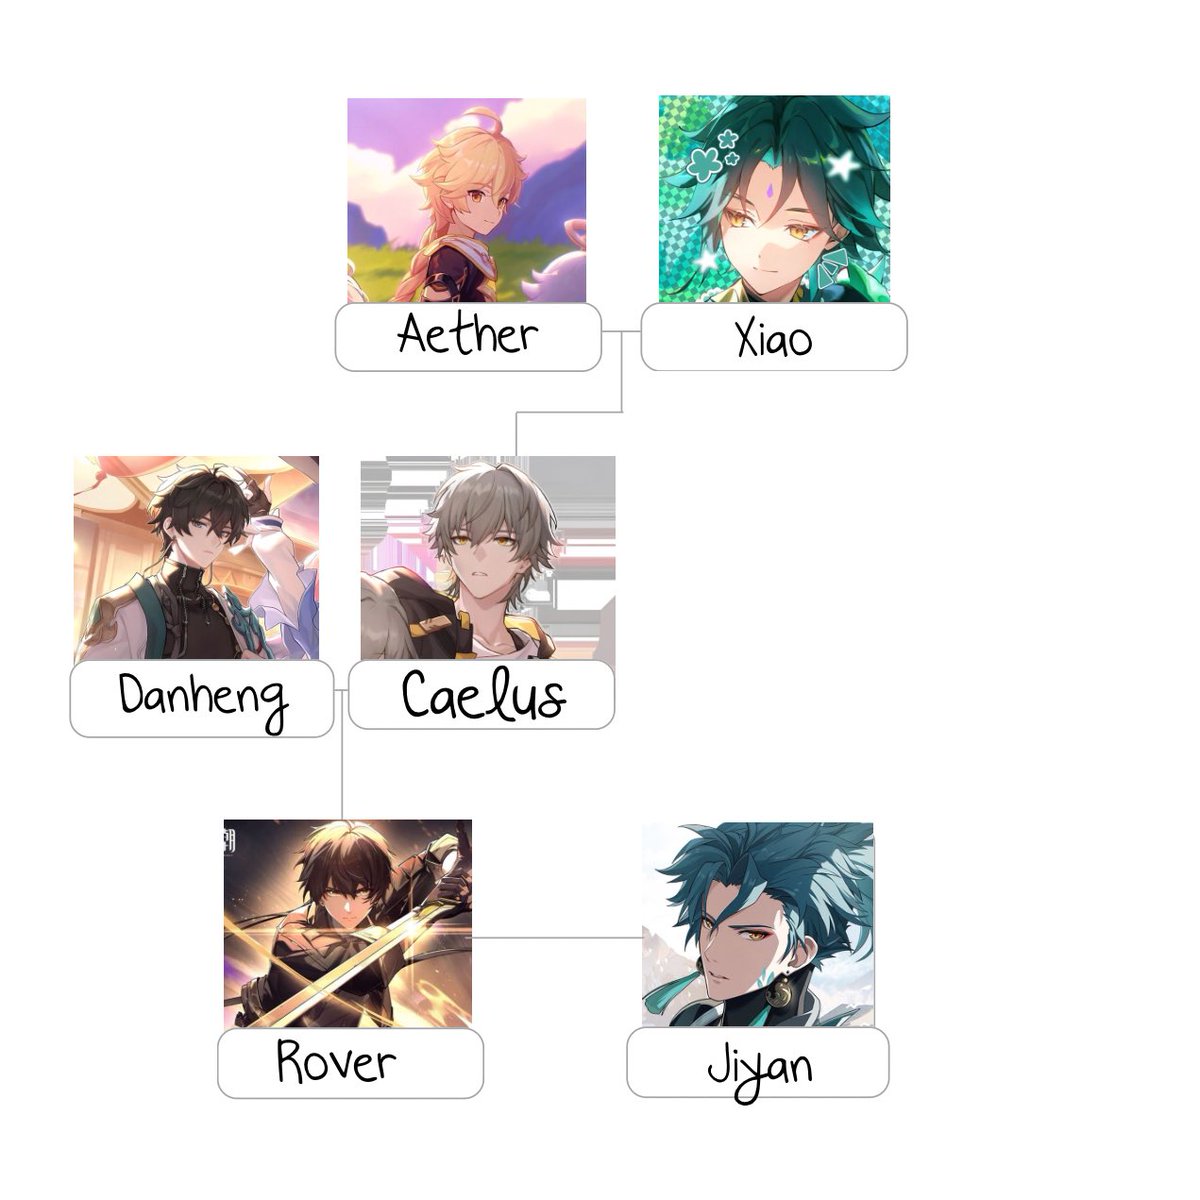 Family tree 🤍

#Xiaother #Caeheng #Yanver 

( idk Jiyan and MRover ship name so🧍‍♀️ )